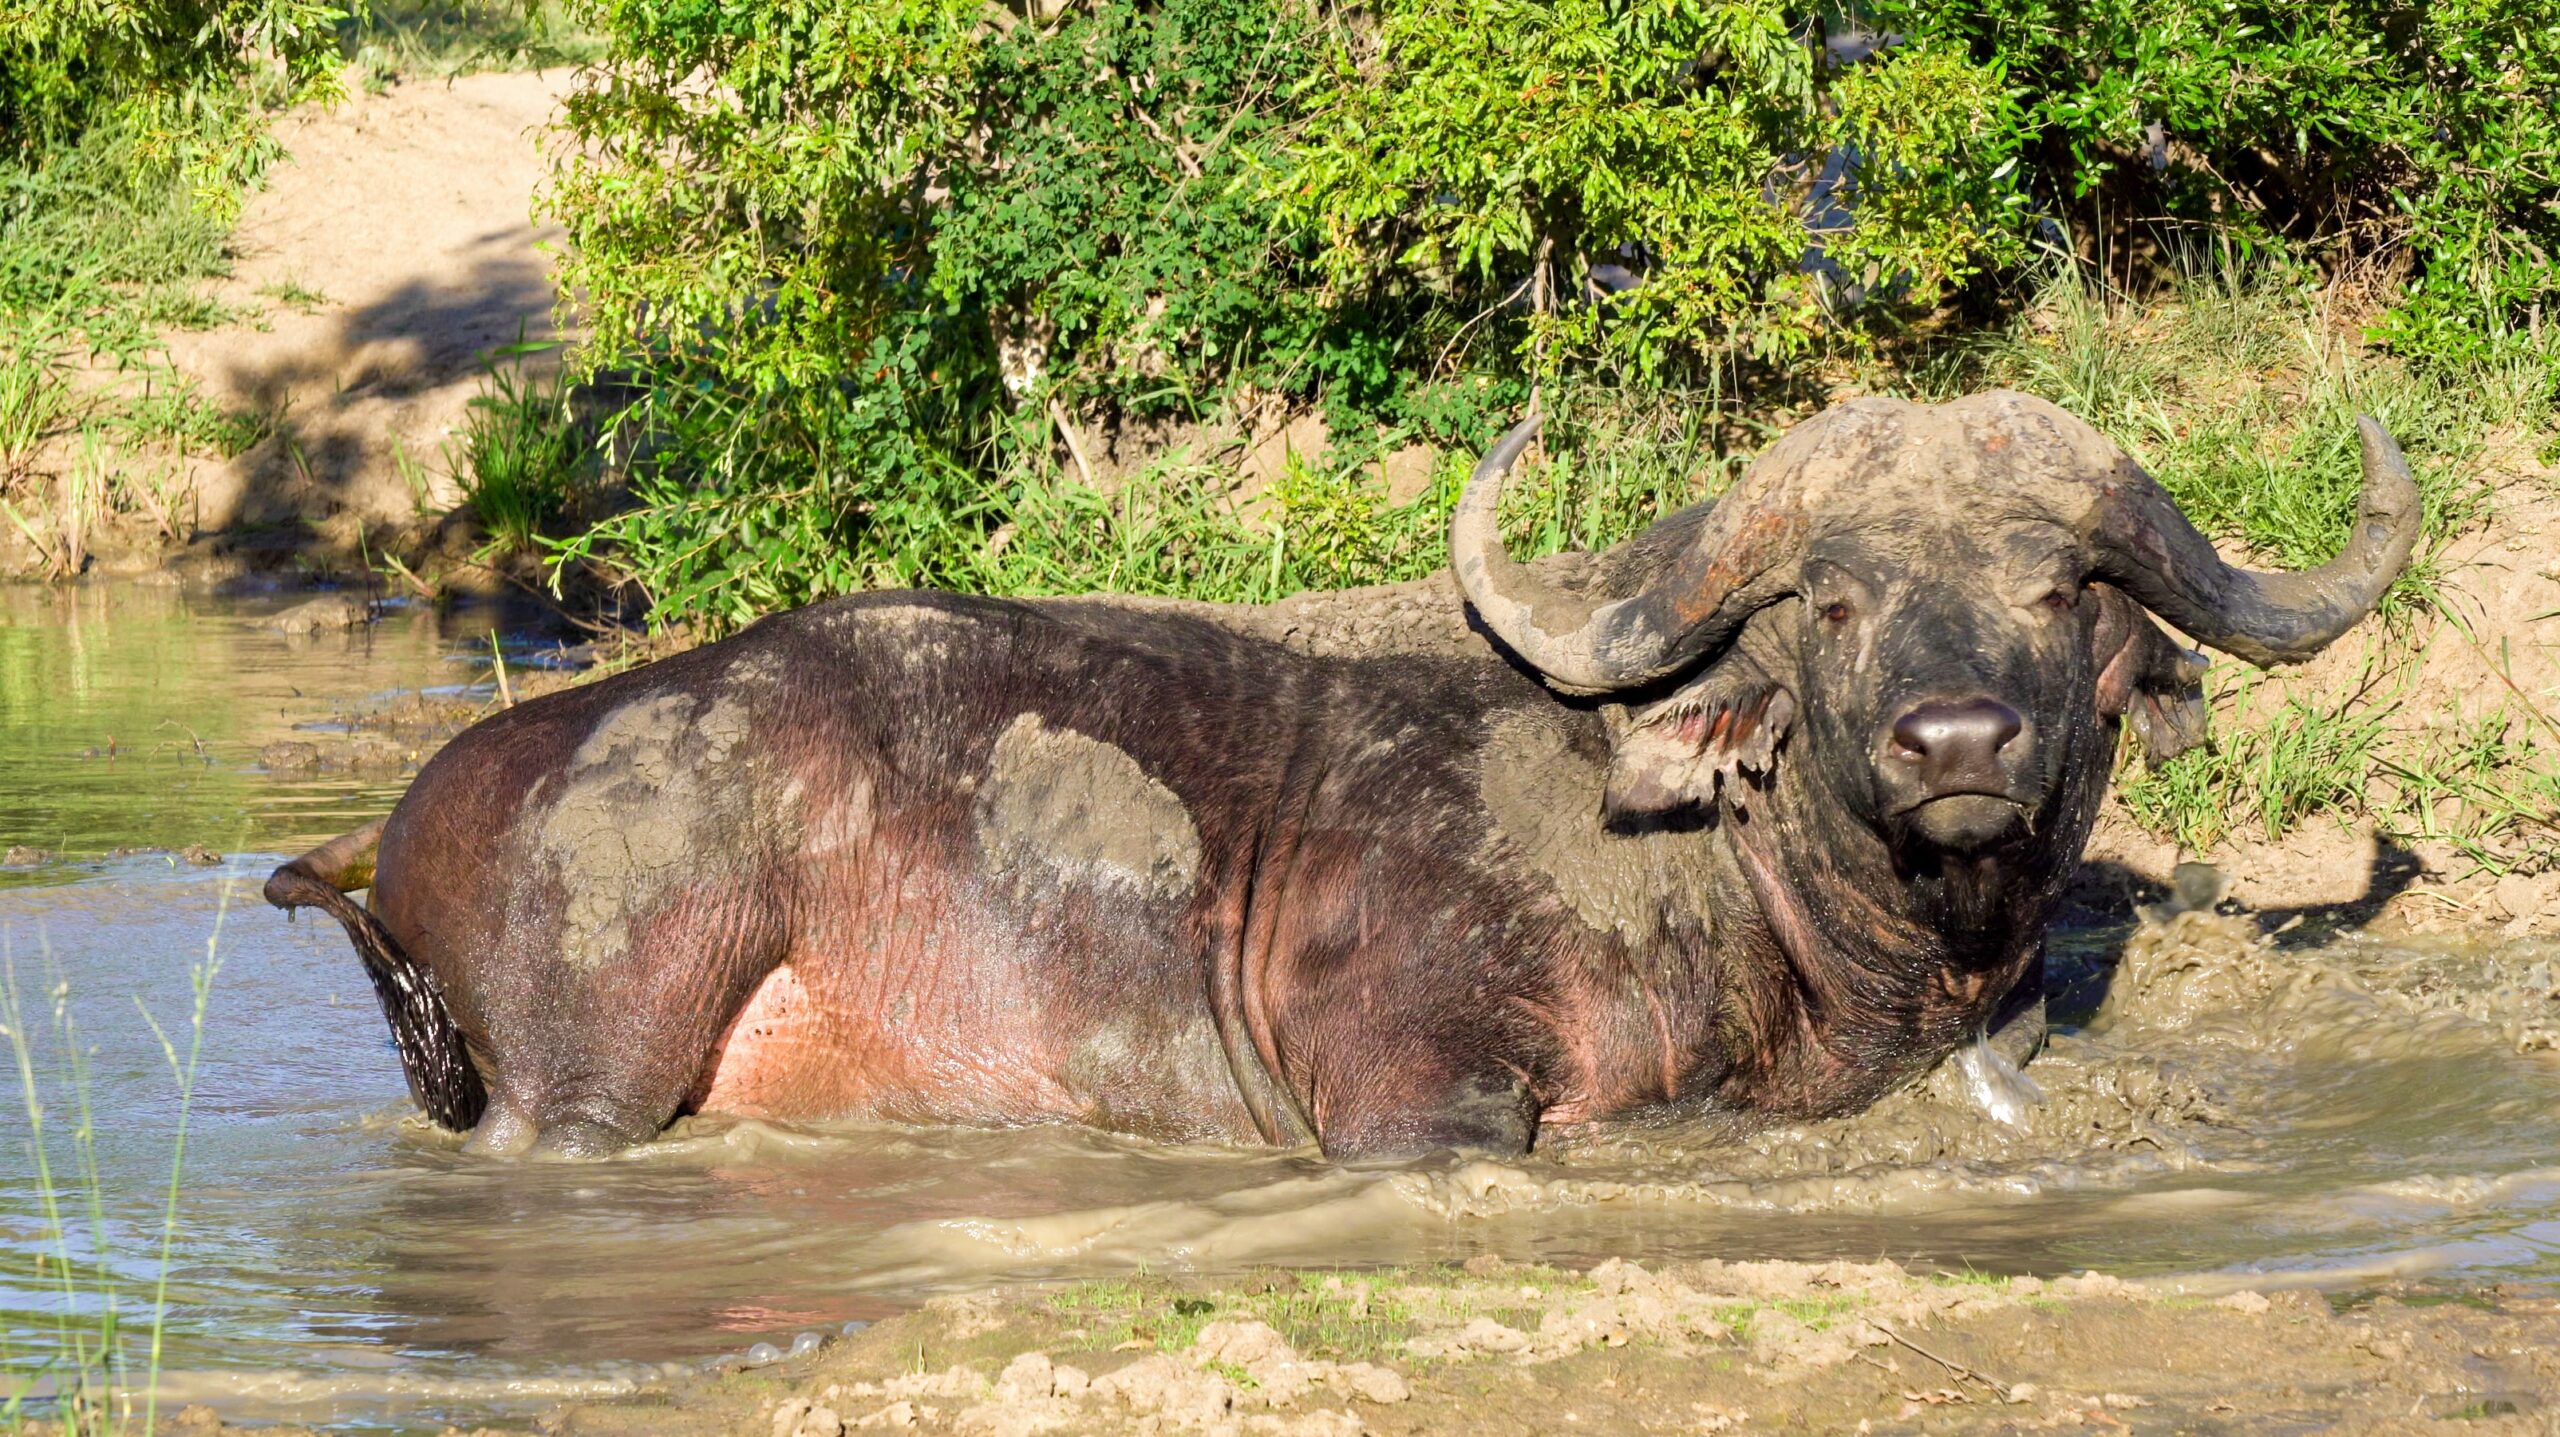 African buffalo are incredibly strong and resilient animals. They can weigh up to 2,000 pounds (900 kilograms) and have muscular bodies that can withstand attacks from predators. Interestingly, injured buffalo often survive and recover from severe wounds, demonstrating their toughness and endurance.